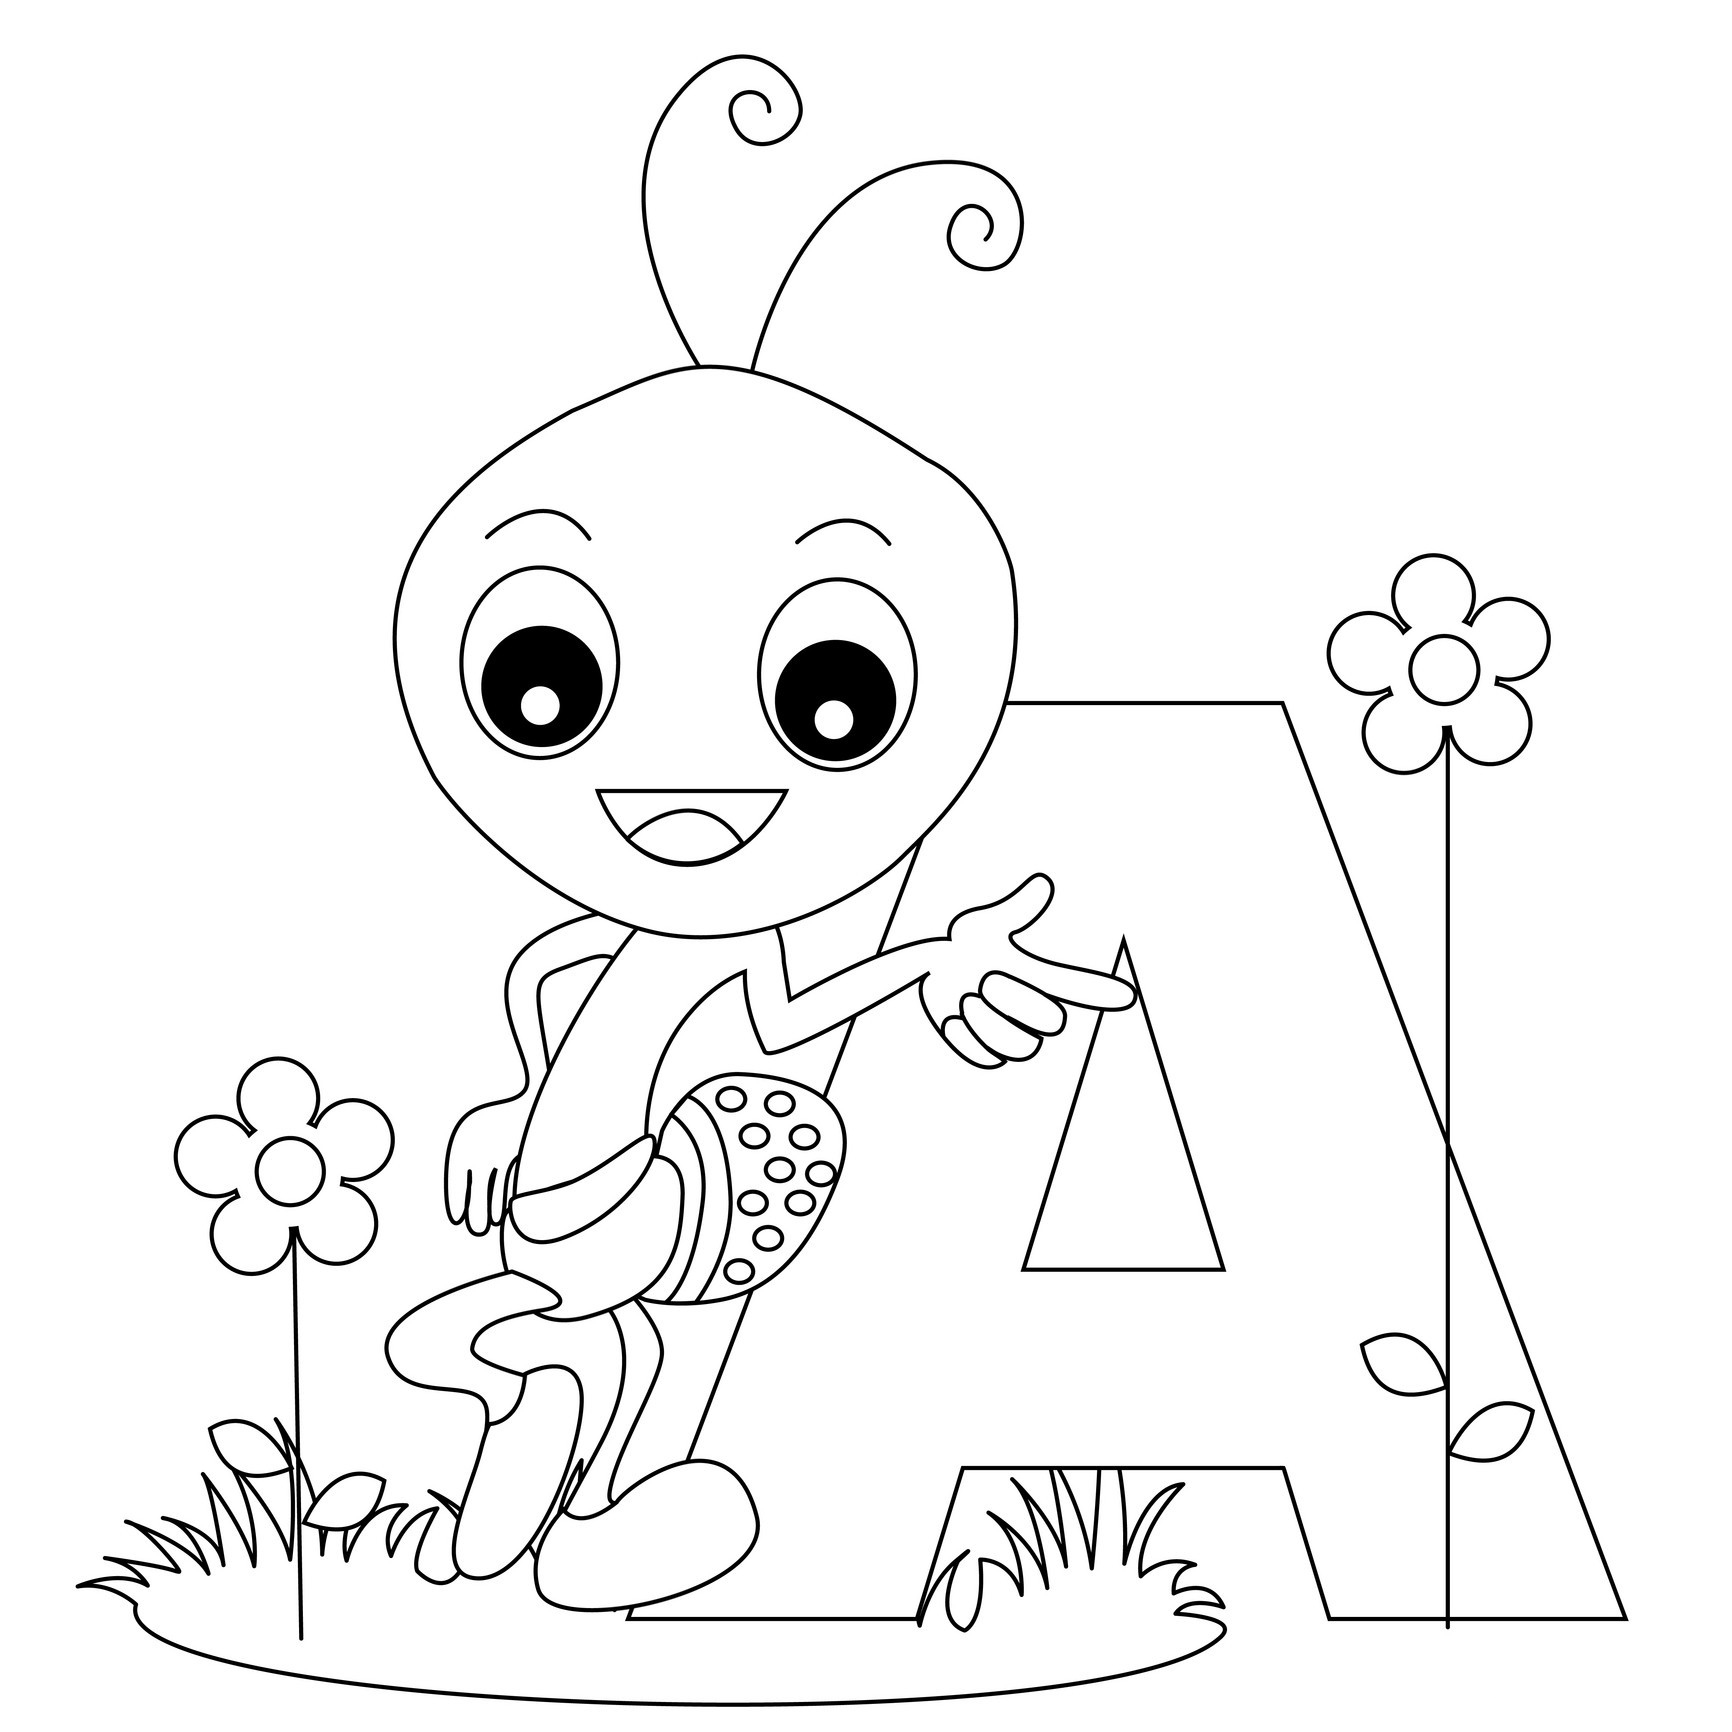 A Letter Coloring Pages   Coloring Home